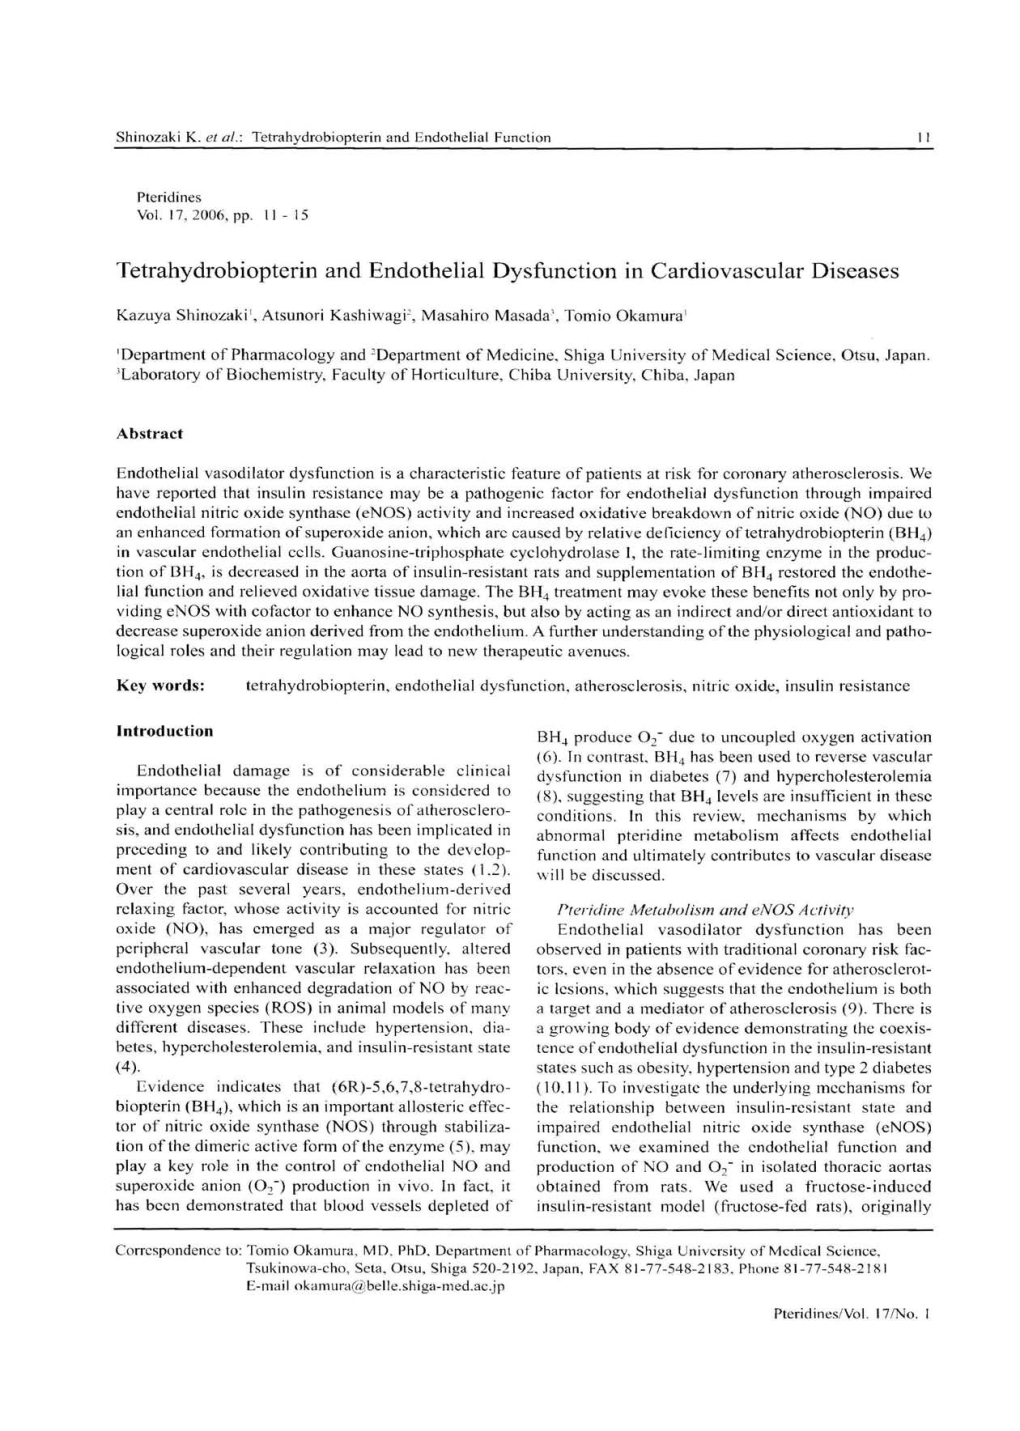 Tetrahydrobiopterin and Endothelial Dysfunction in Cardiovascular Diseases